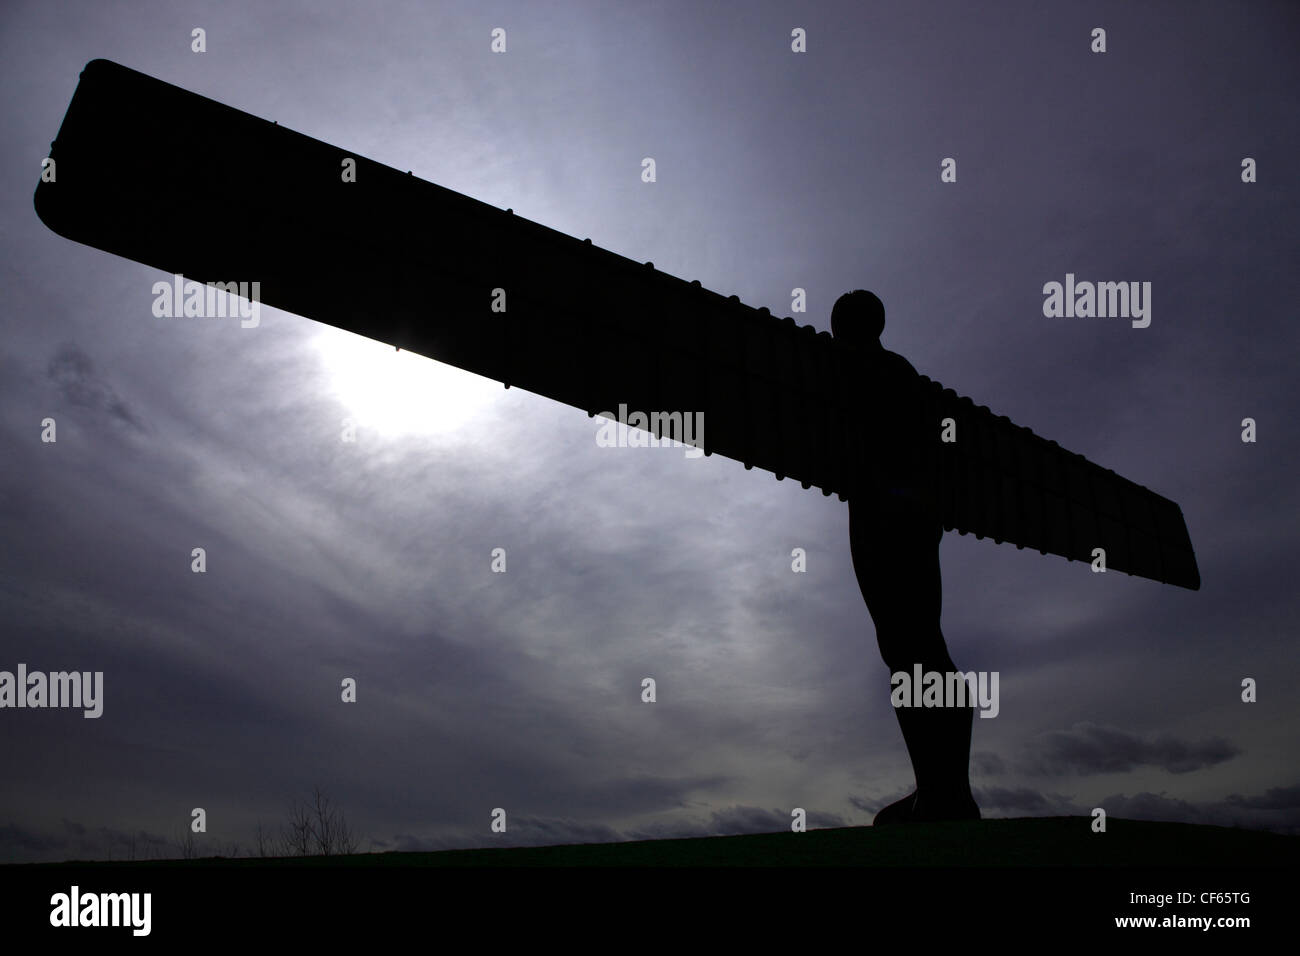 Silhouette of the Angel of the North near Gateshead. Stock Photo